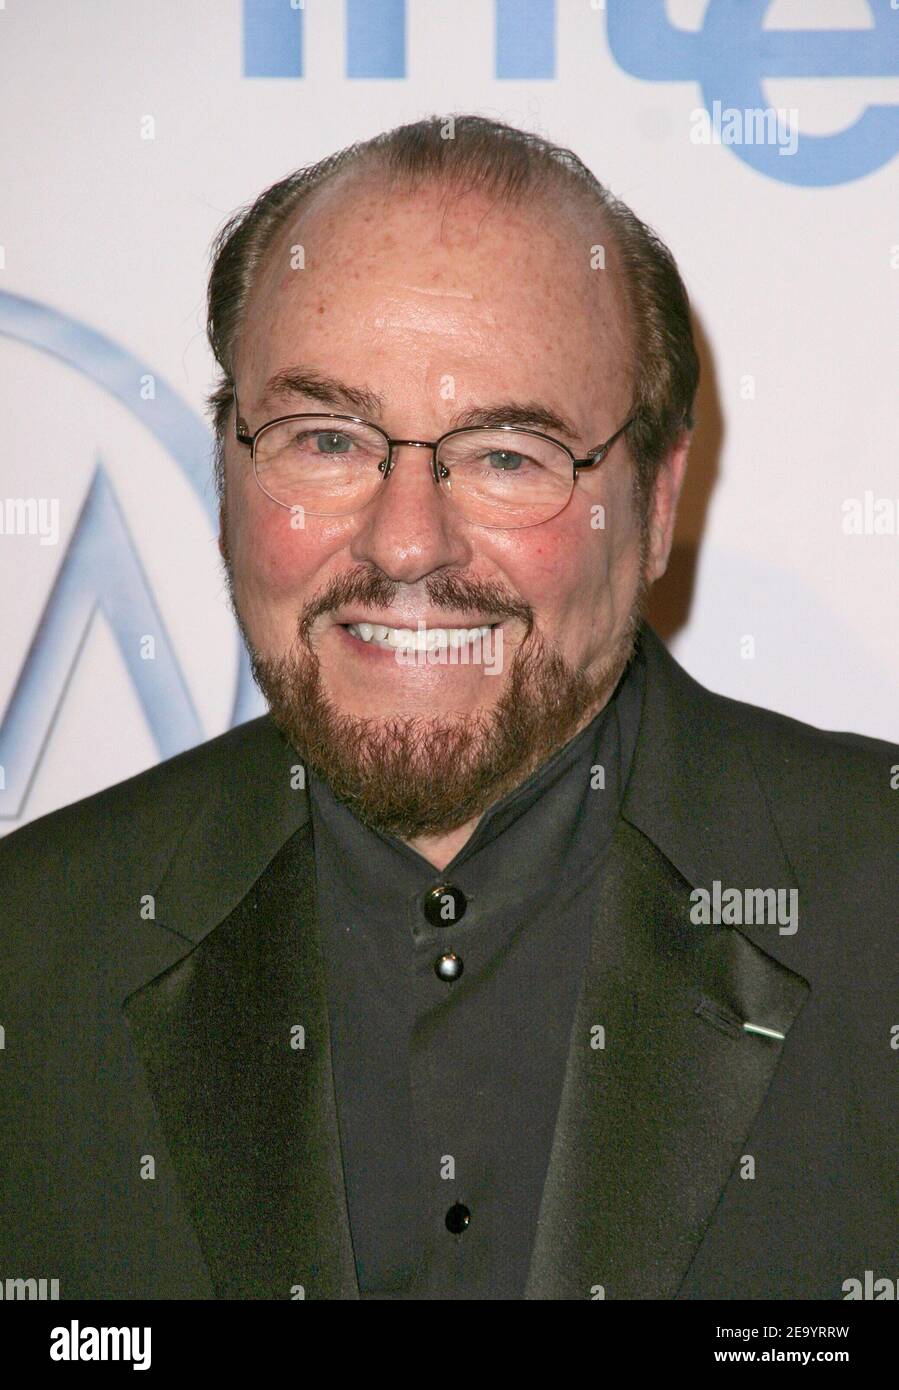 James Lipton attends the 16th Annual Producers Guild of America Awards held at the Culver Studios in Culver City, CA on January 22, 2005. Photo by Denise Fleming/ABACA. Stock Photo